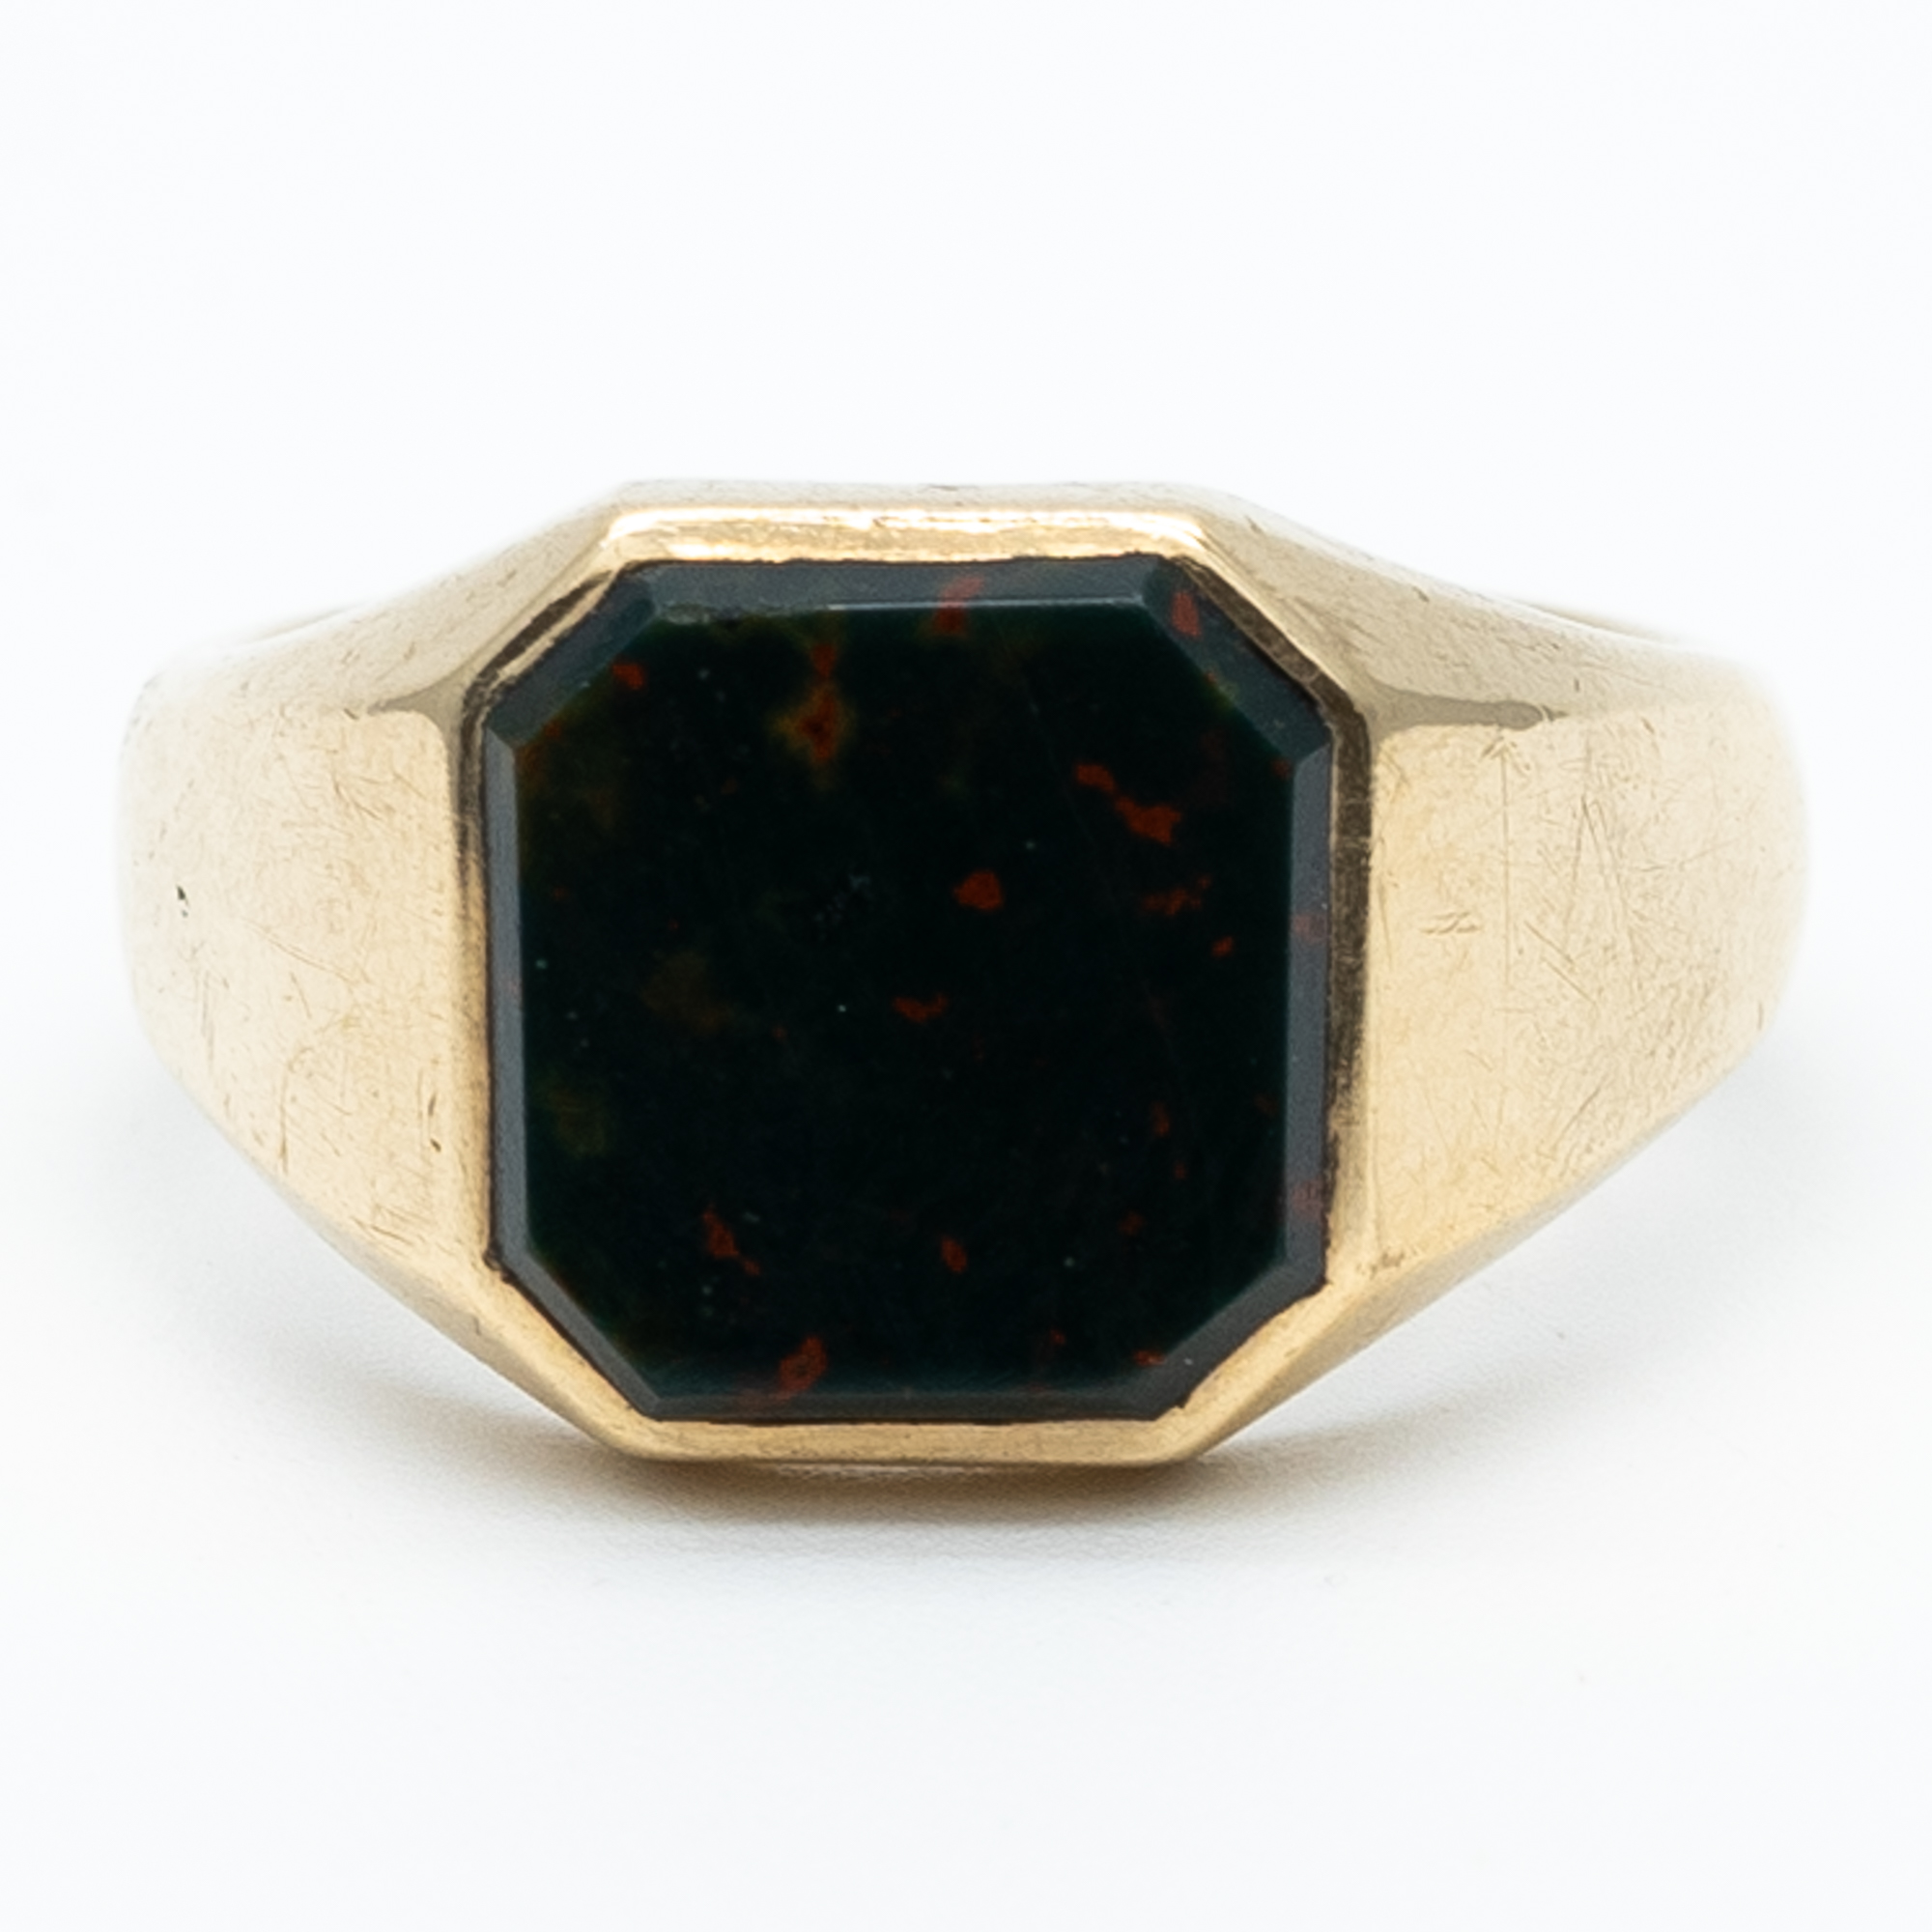 A 9ct yellow gold gents blood stone signet ring